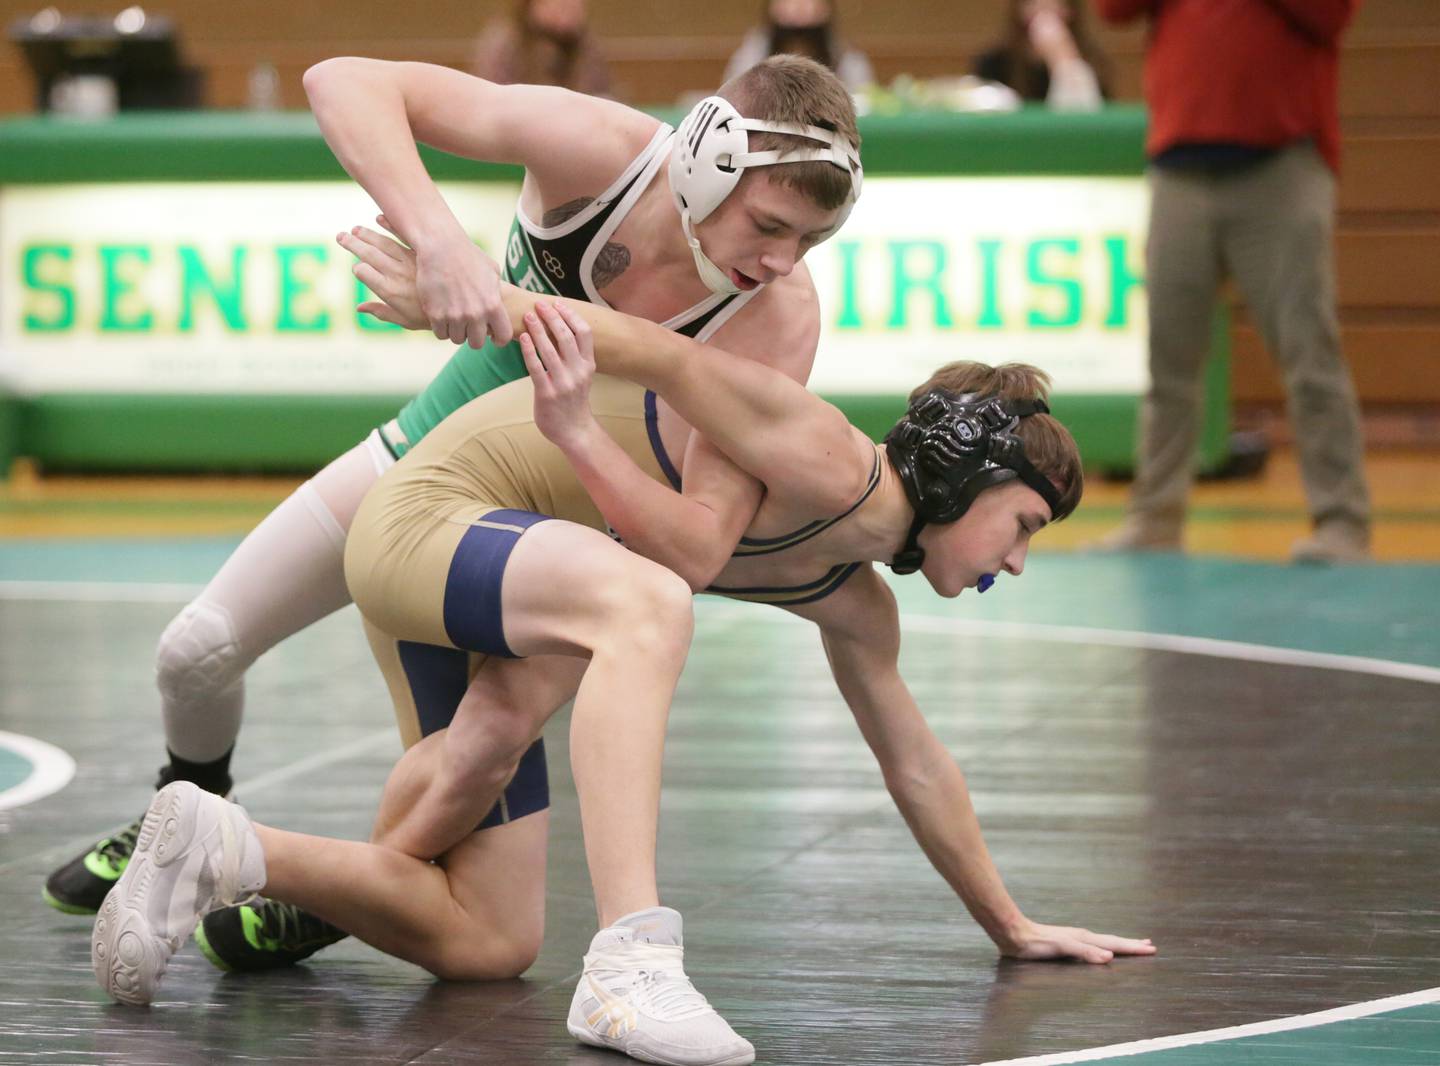 Seneca's Jaden Casey works on his Marquette counterpart in the 126-pound weight class during a triangular wrestling meet on Wednesday, Jan. 12, 2022, in Seneca.